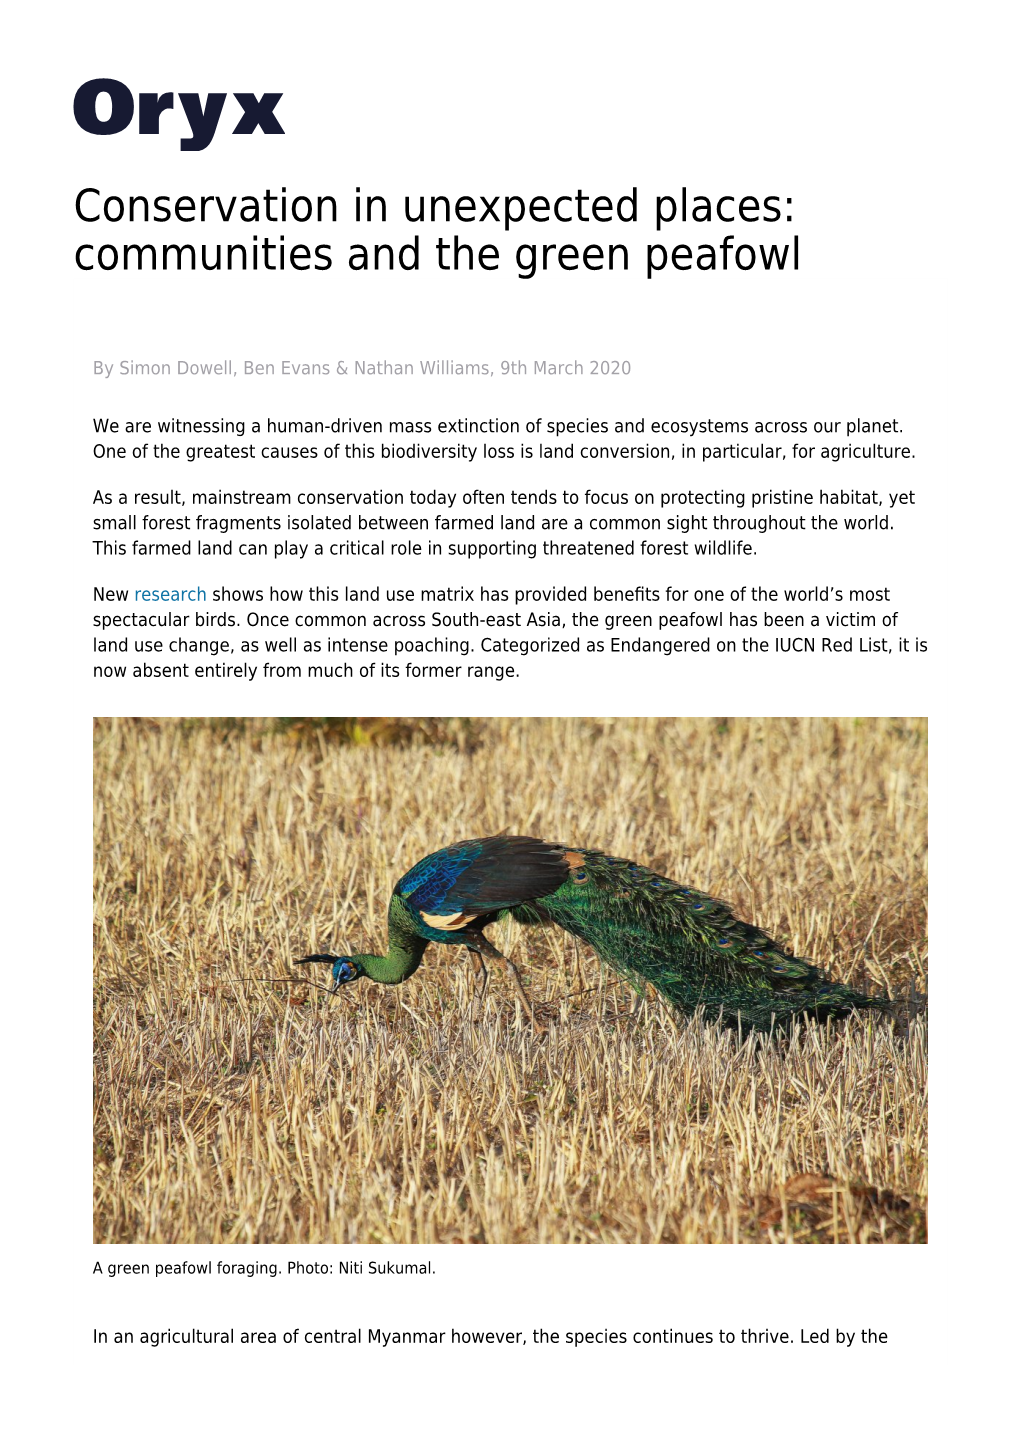 Communities and the Green Peafowl